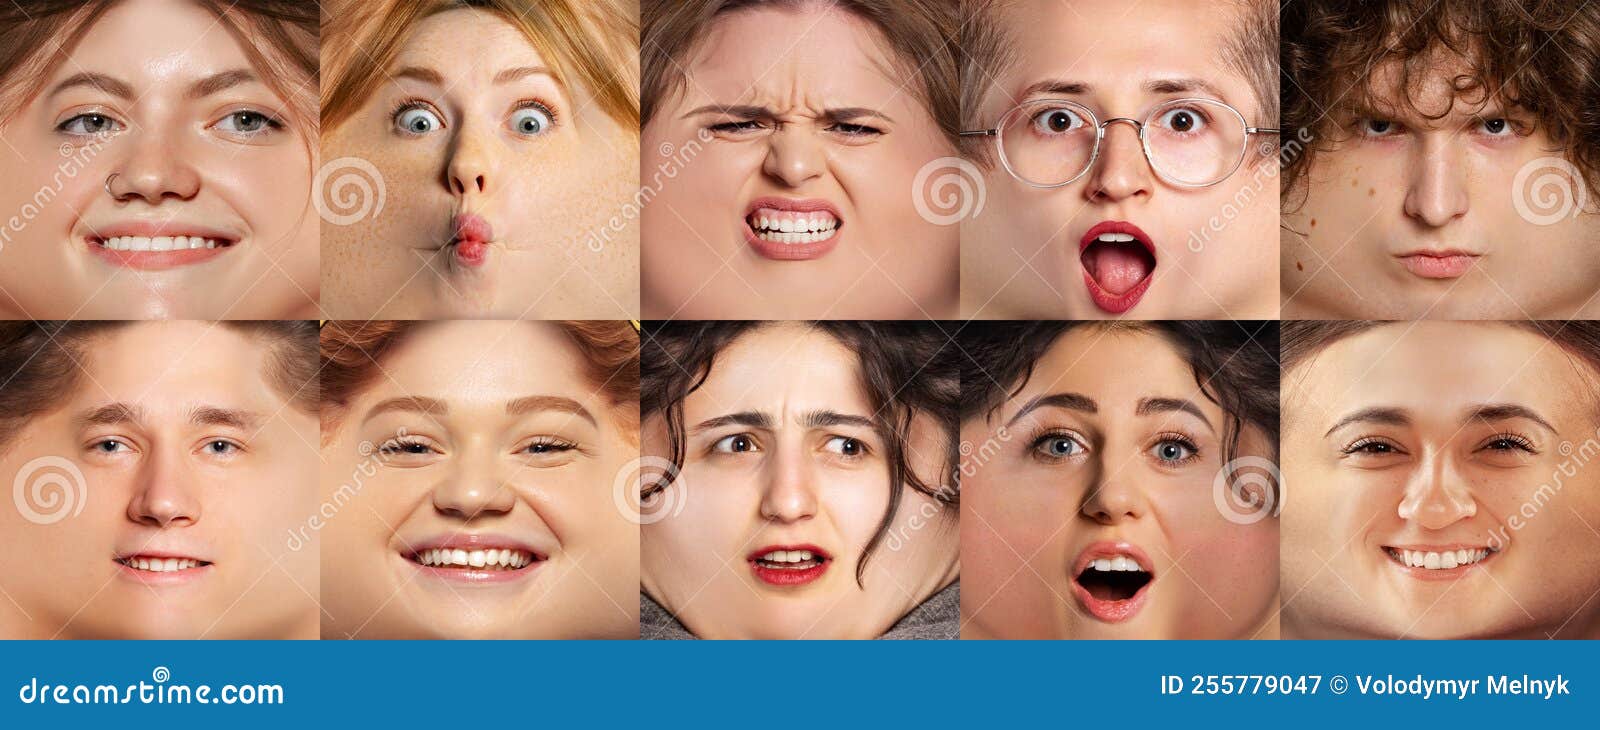 Set of Funny Portraits of Different Young People Faces Expressing Emotions.  Cartoon Style. Happy, Angry, Sad, Annoyed Stock Image - Image of human,  face: 255779047